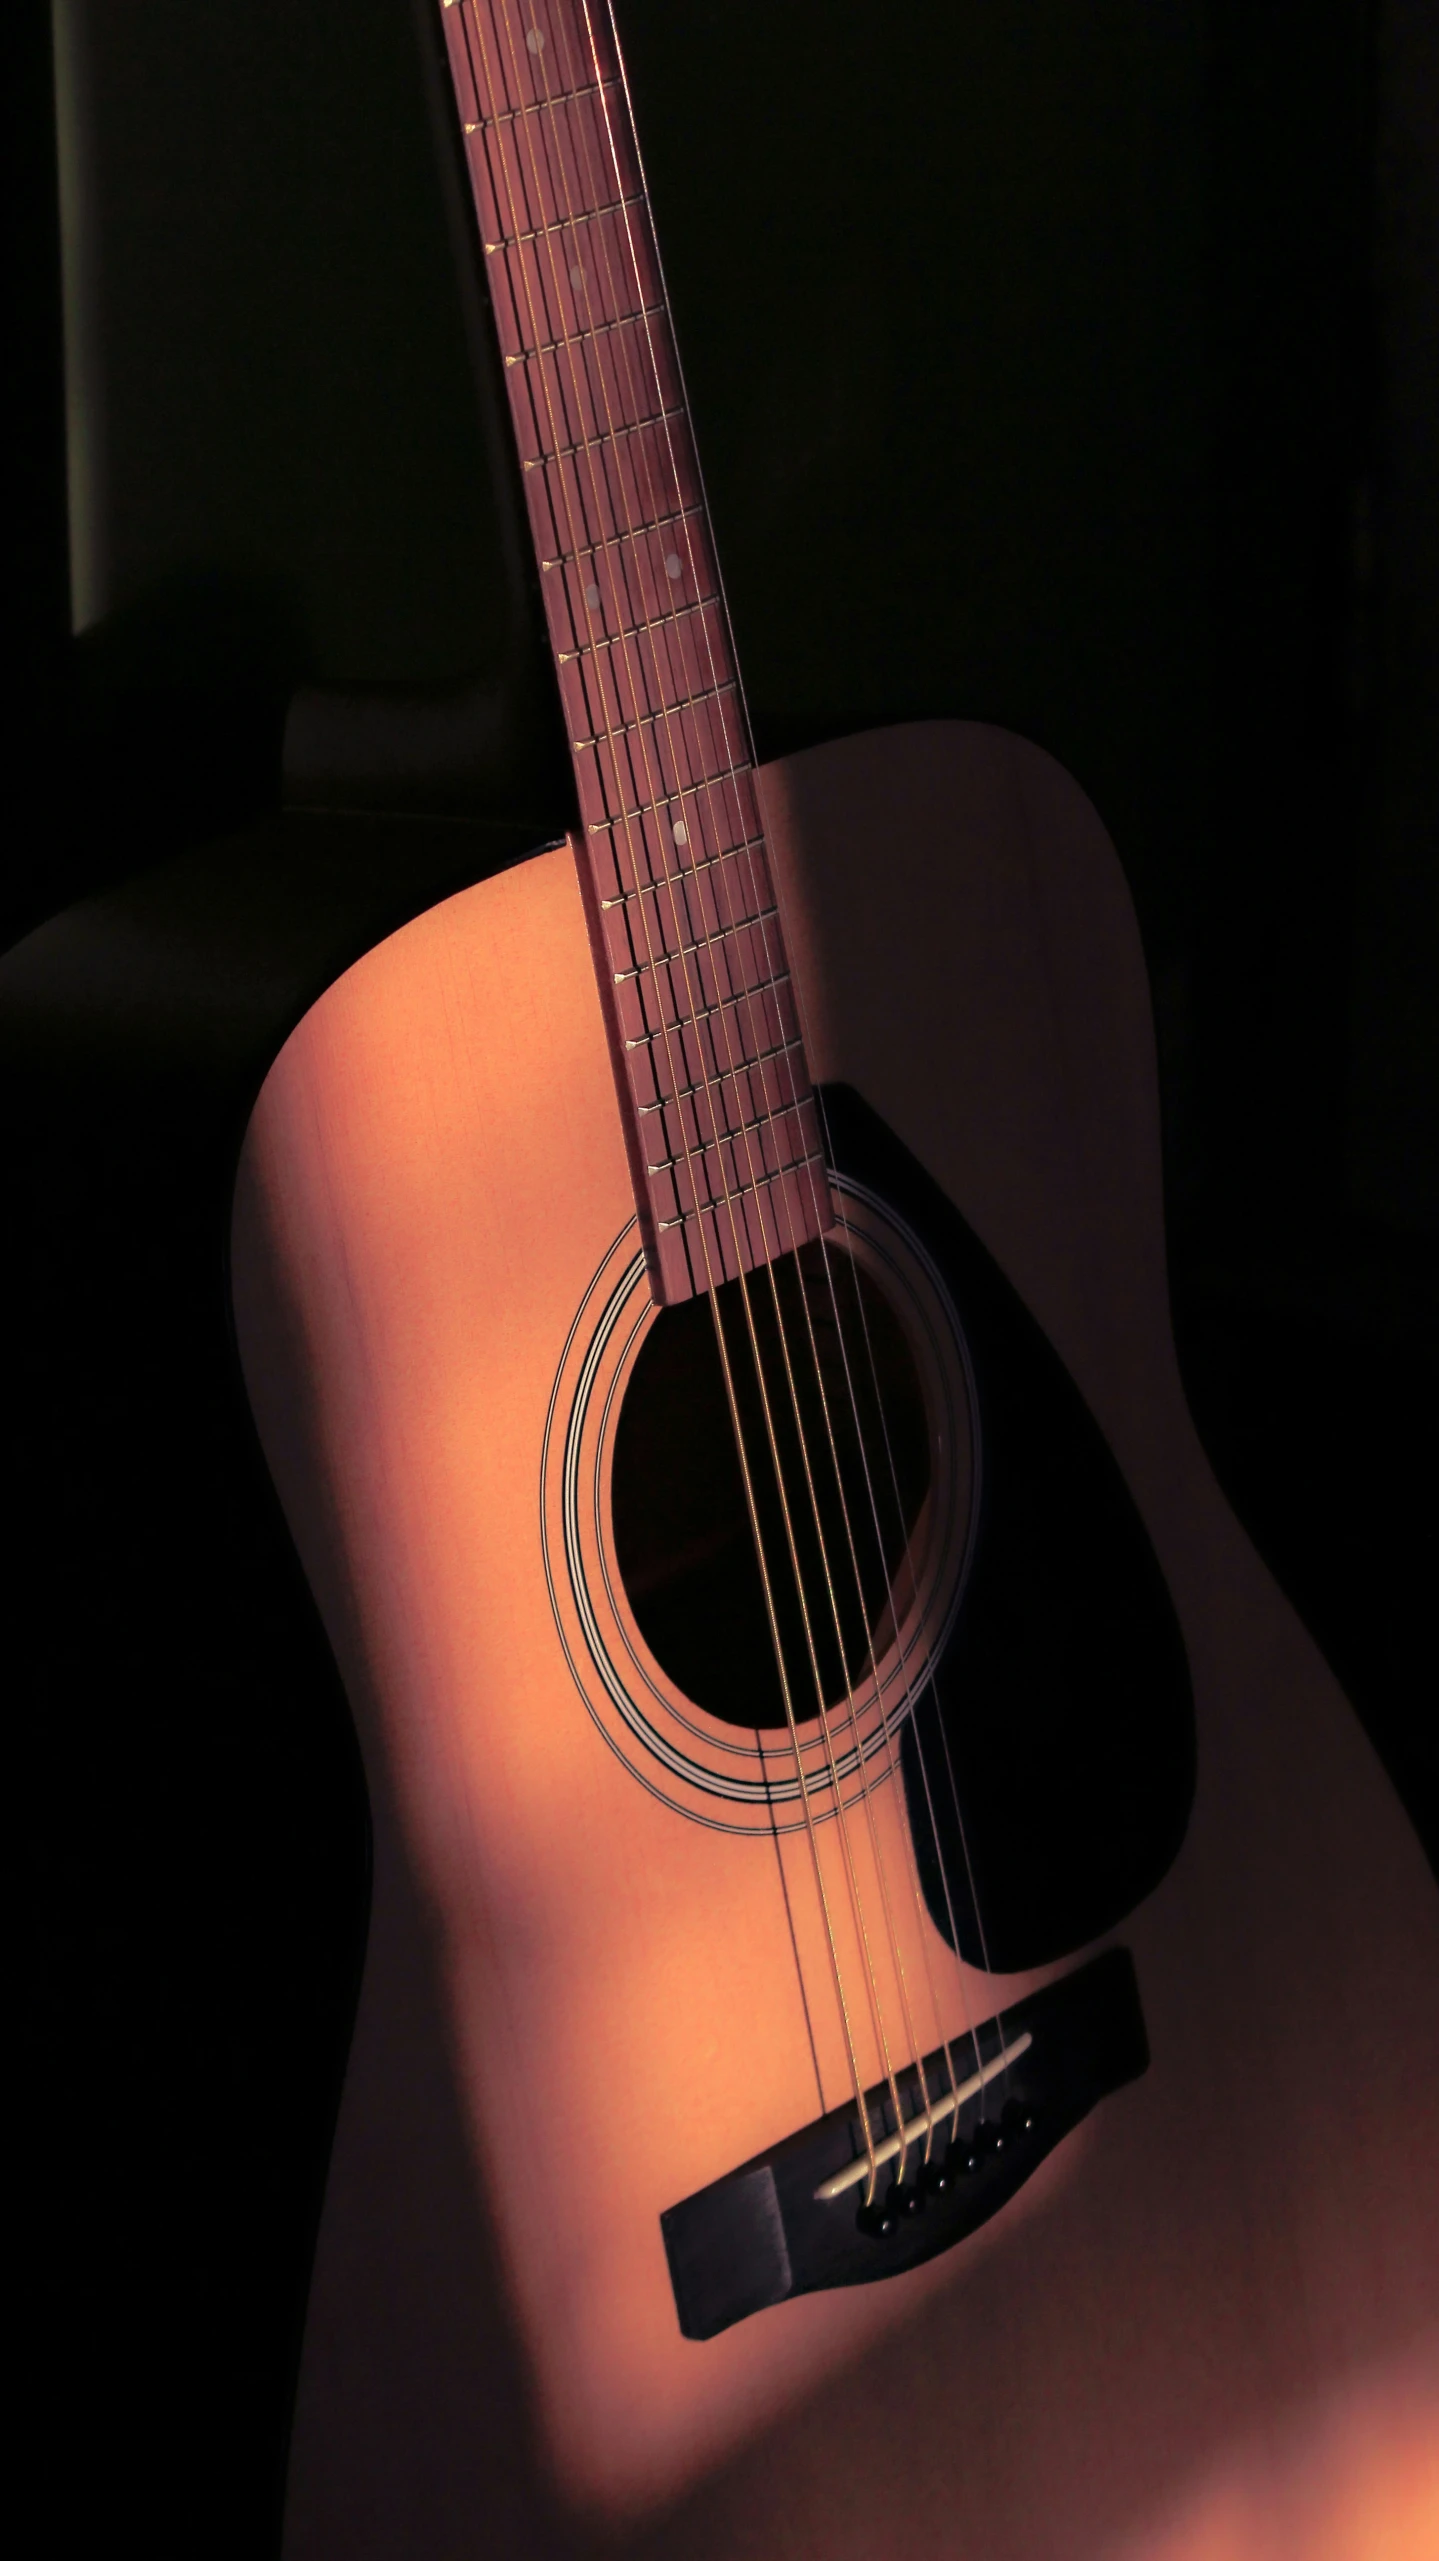 an acoustic guitar is laying on its side, a shadow cast by it